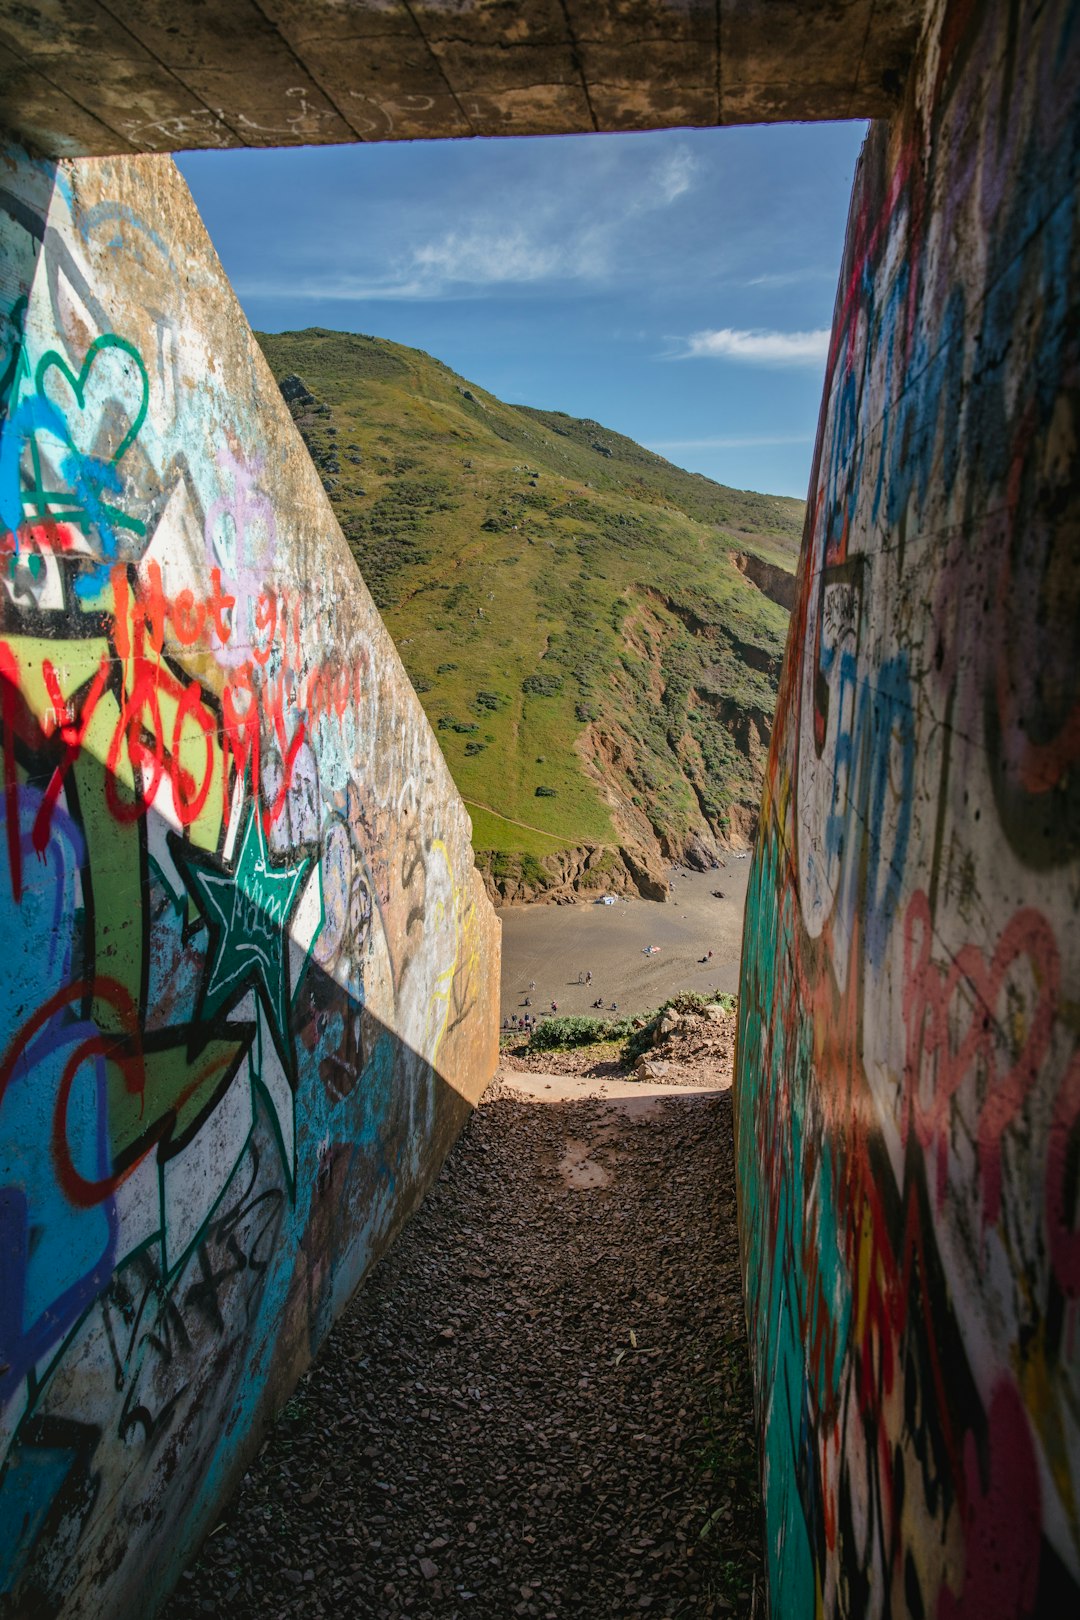 graffiti on wall near body of water during daytime